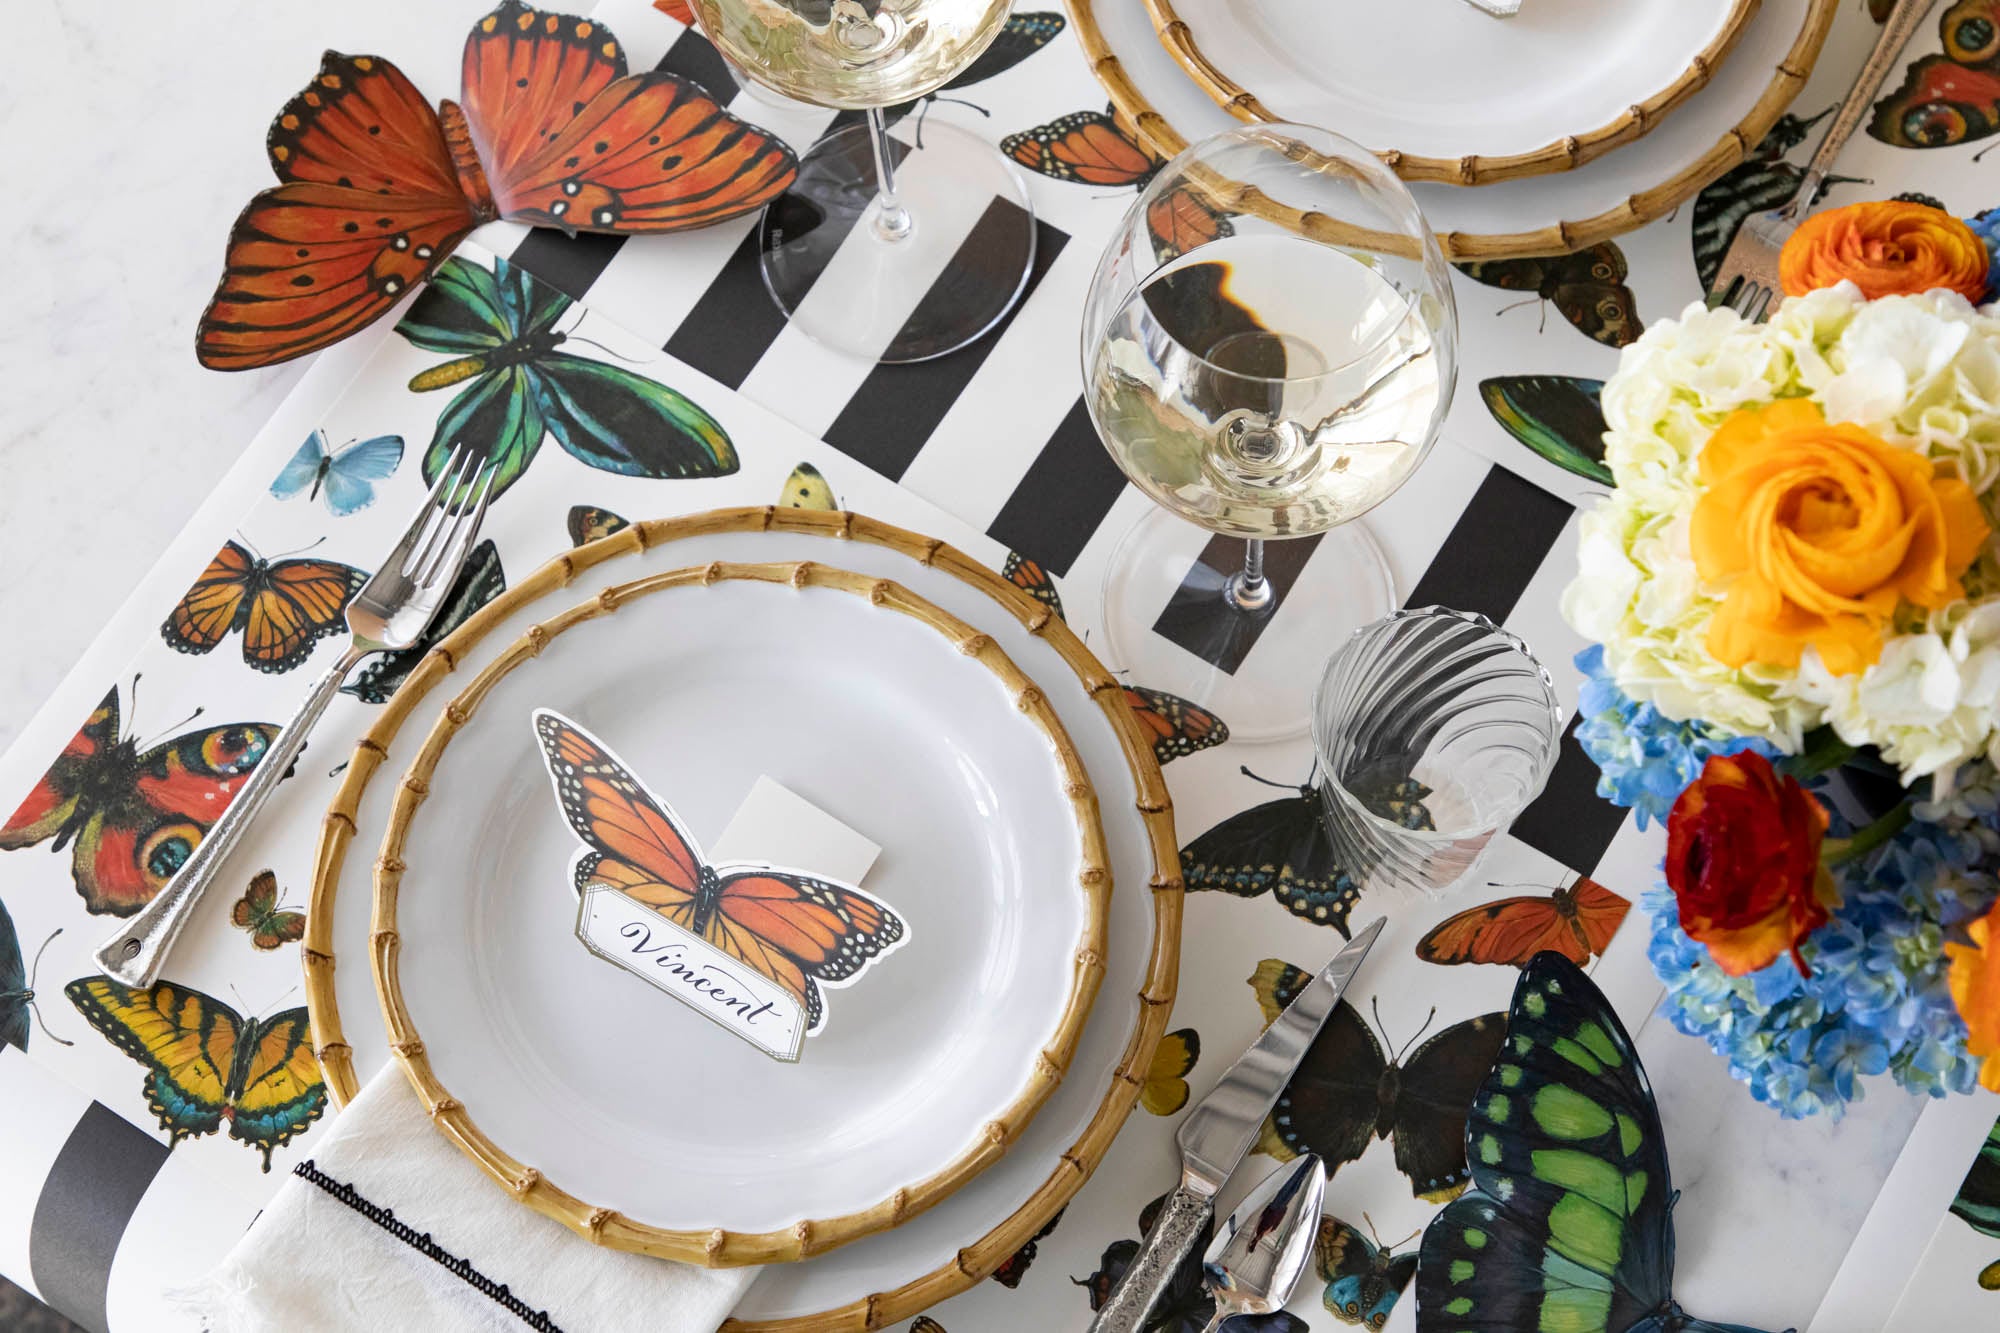 Elegant table setting with butterfly-themed decor and place cards on a black and white striped tablecloth.